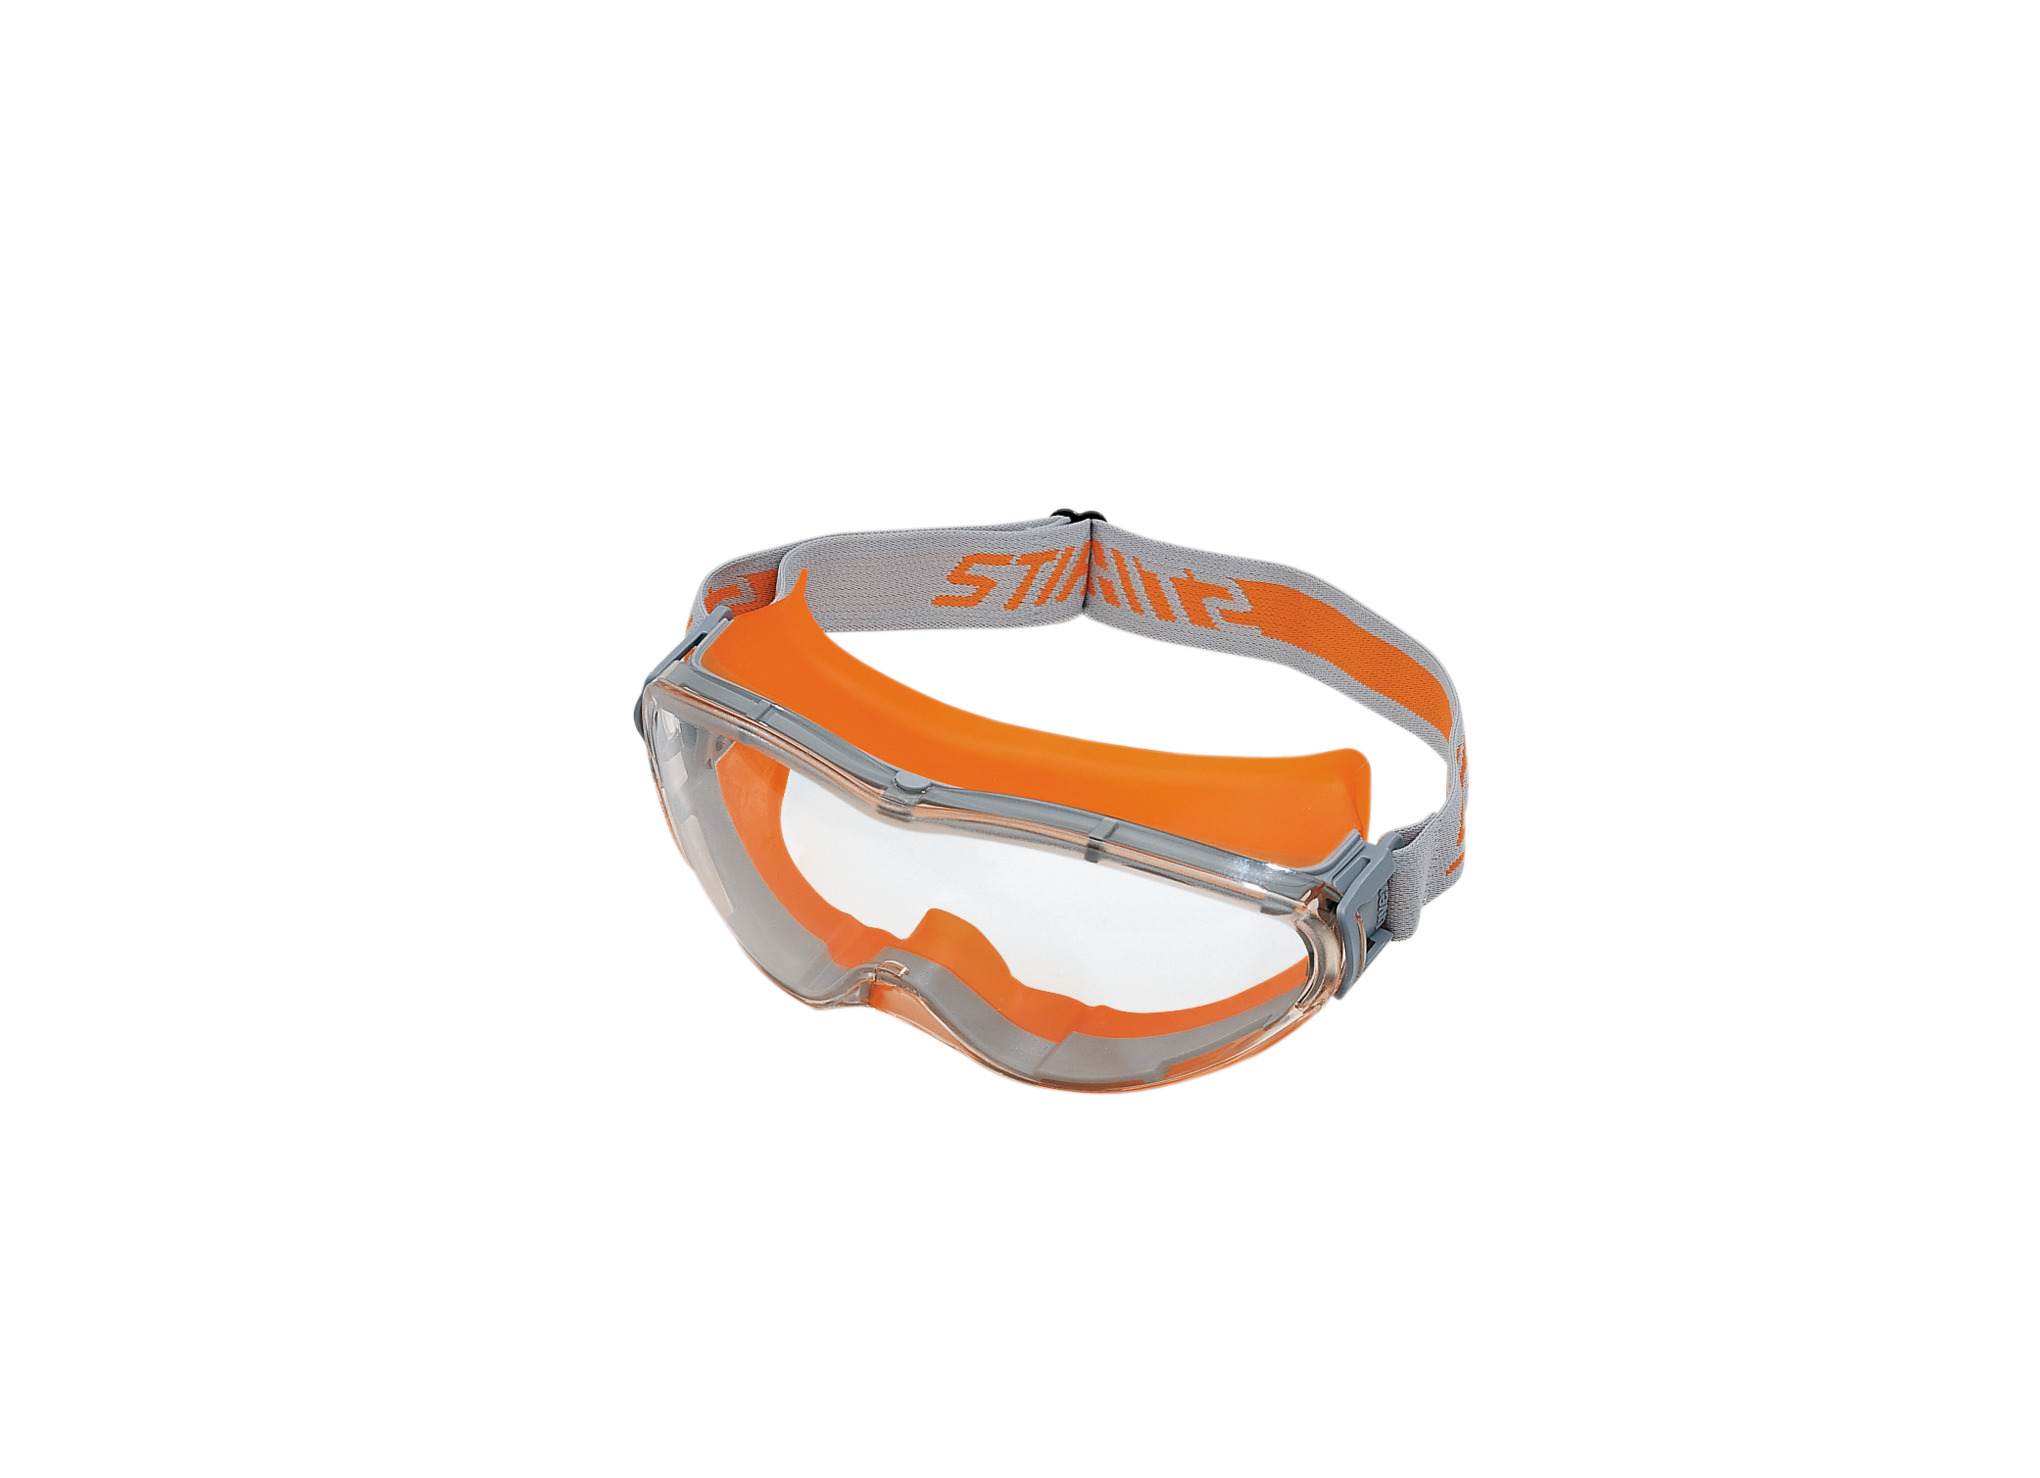 ULTRASONIC safety goggles - clear